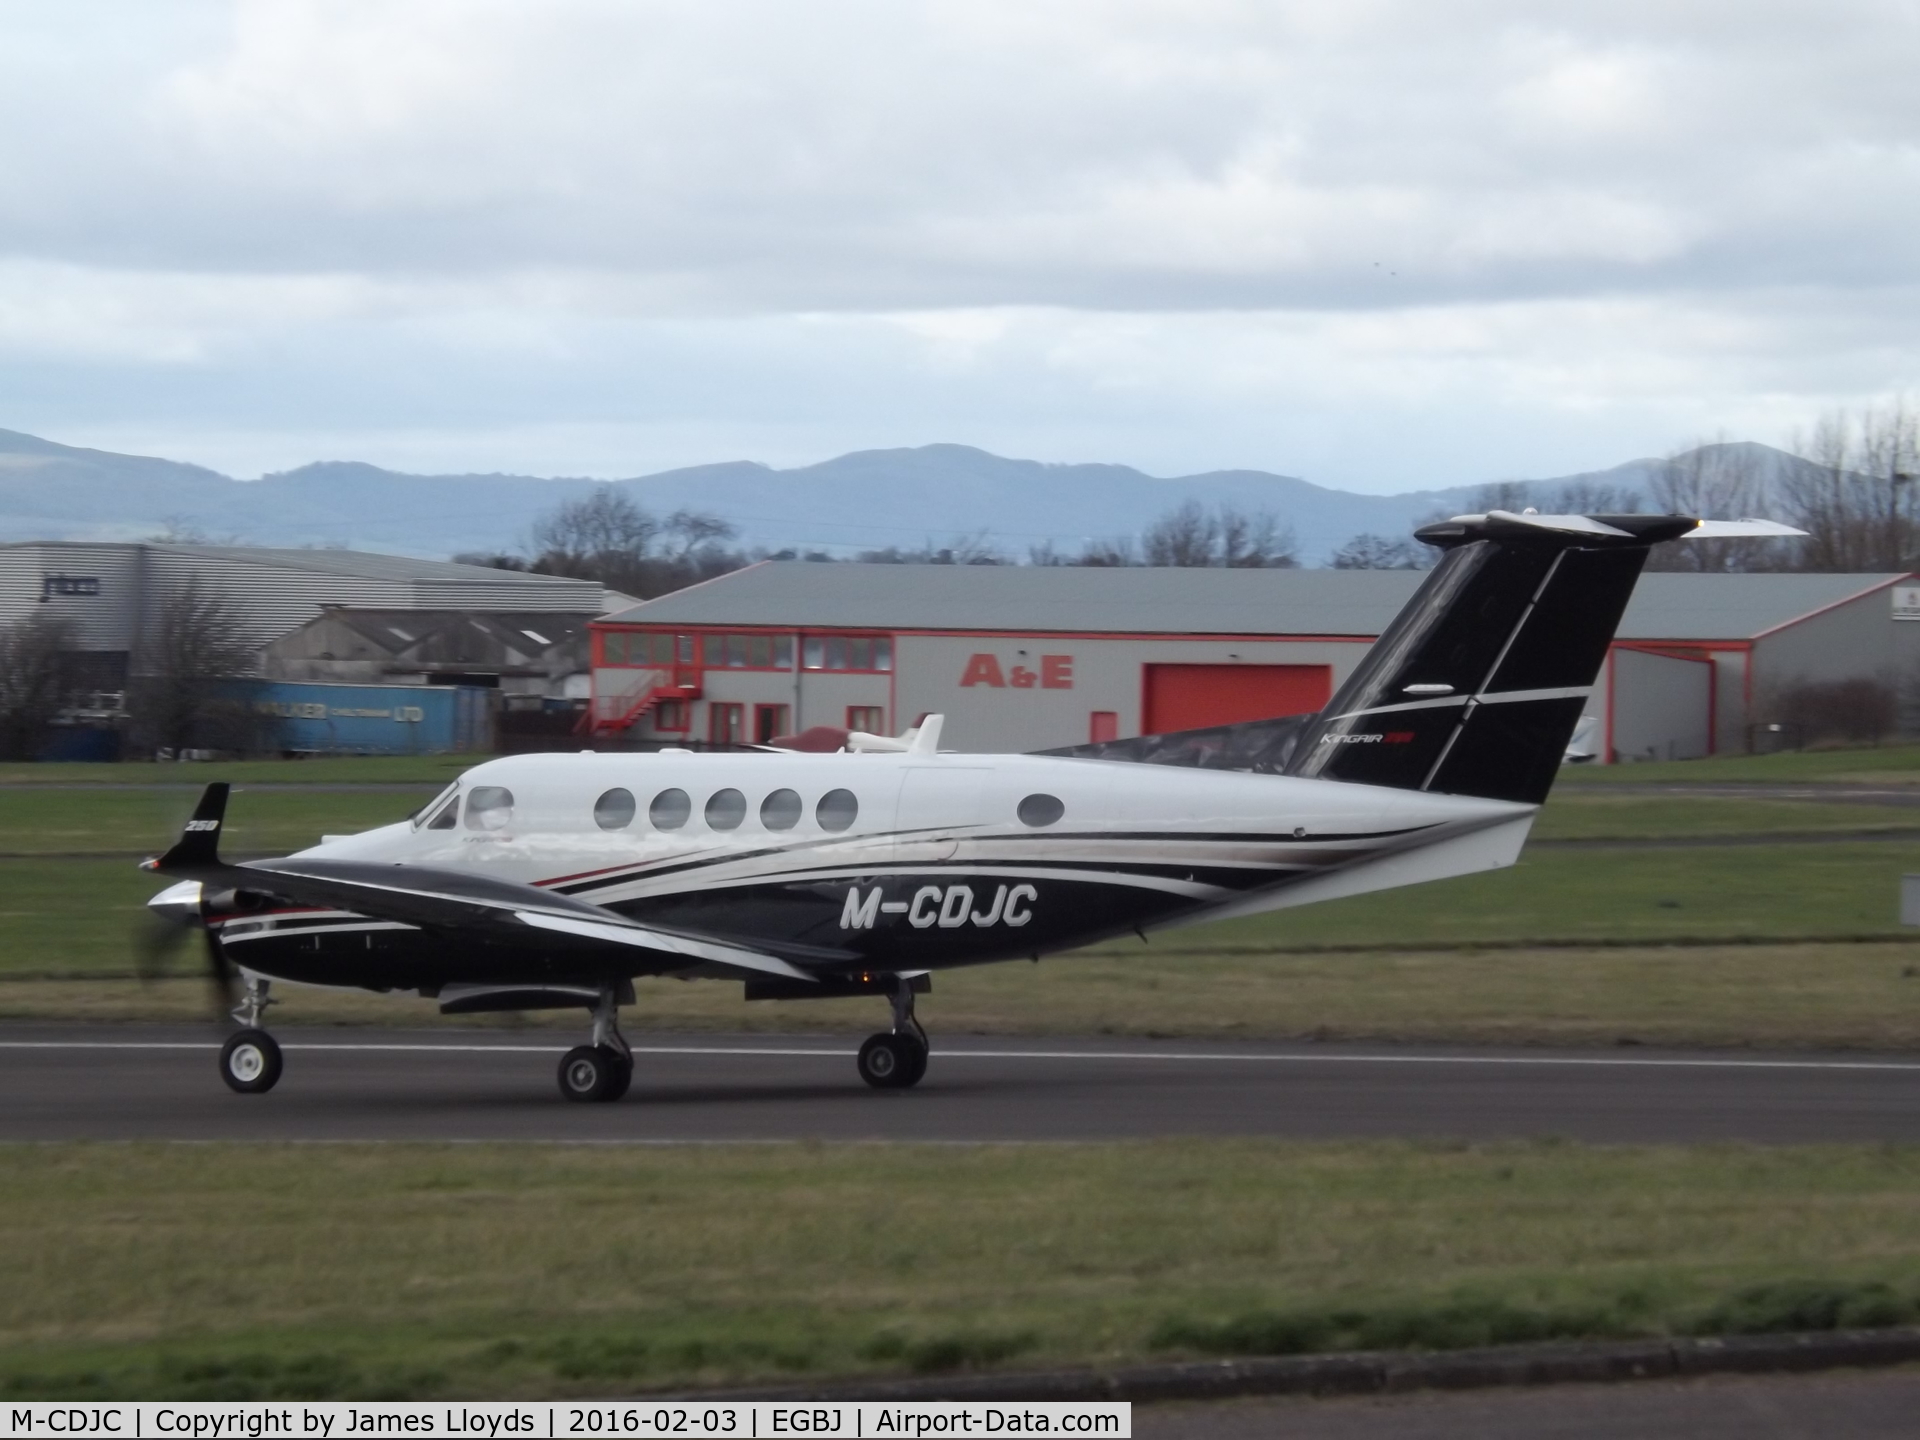 M-CDJC, 2015 Beech B200GT King Air C/N BY-233, Takeing off runway 27 at Gloucestershire Airport.